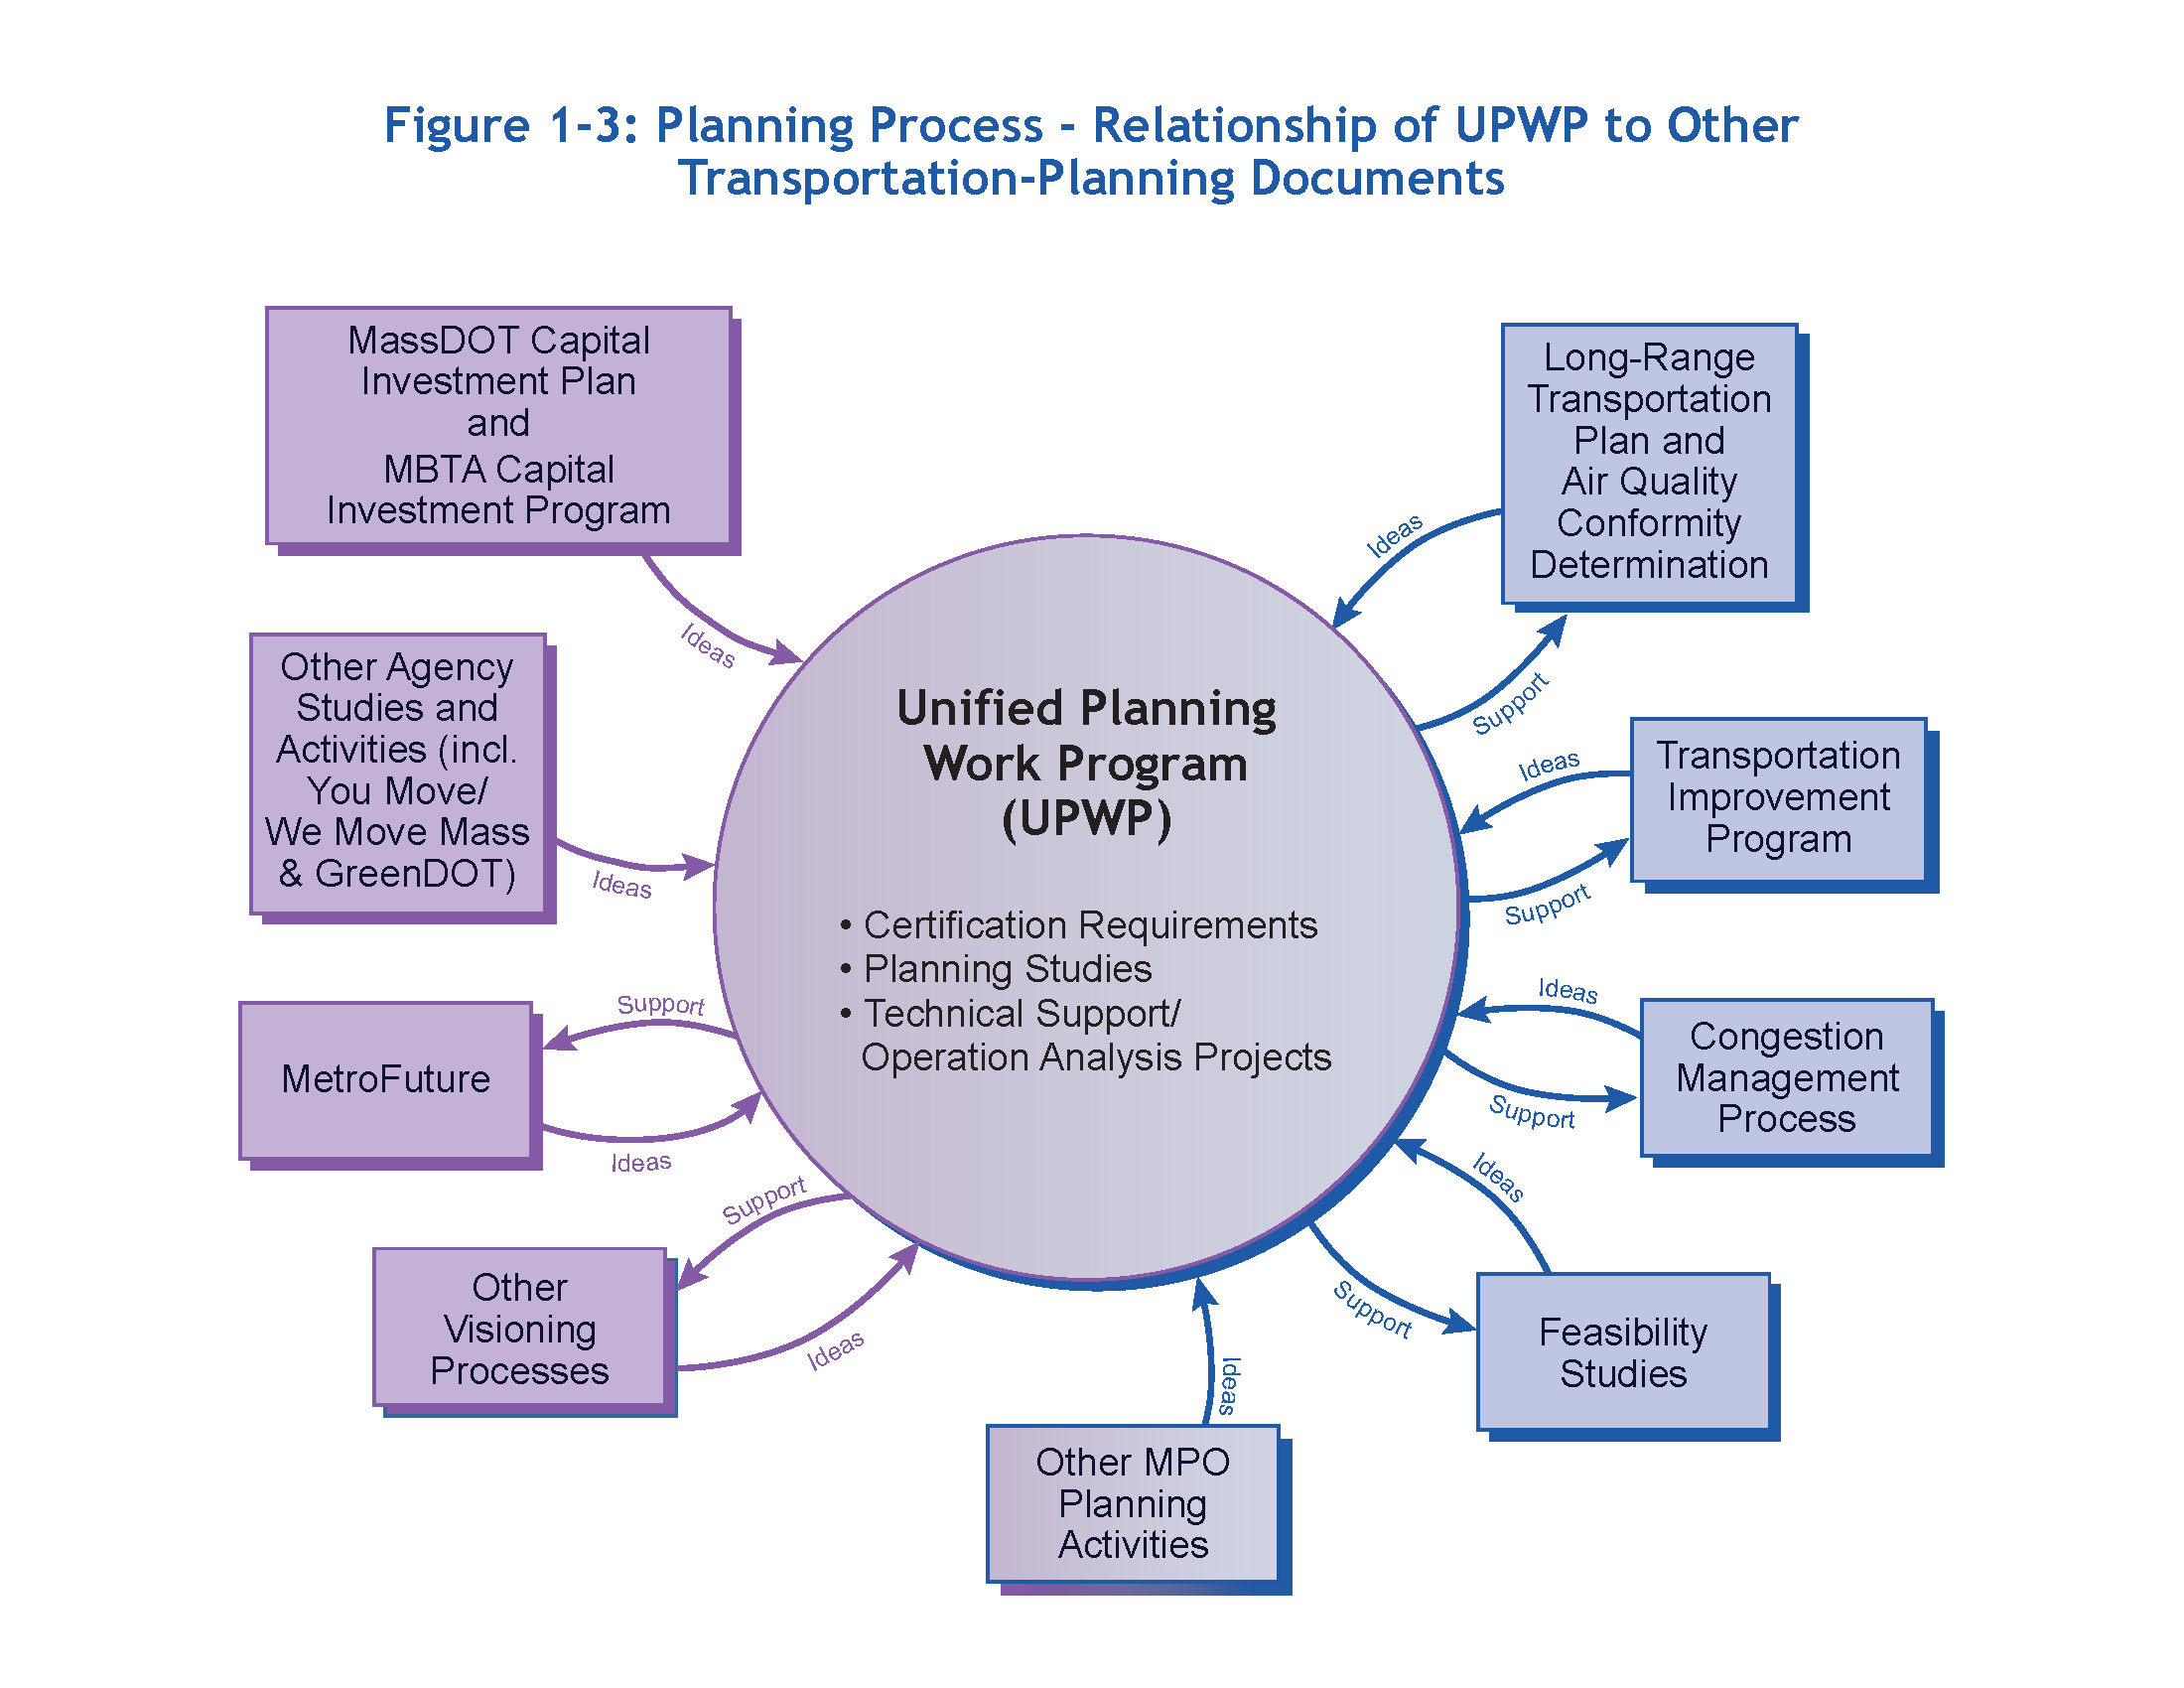 This figure shows how the UPWP relates to the variety of planning documents described in Section 1.3.2, “Coordination with Other Planning Activities.” Some arrows in this figure indicate the flow of support from the UPWP to different documents, and other arrows show the flow of ideas from various documents into the UPWP.